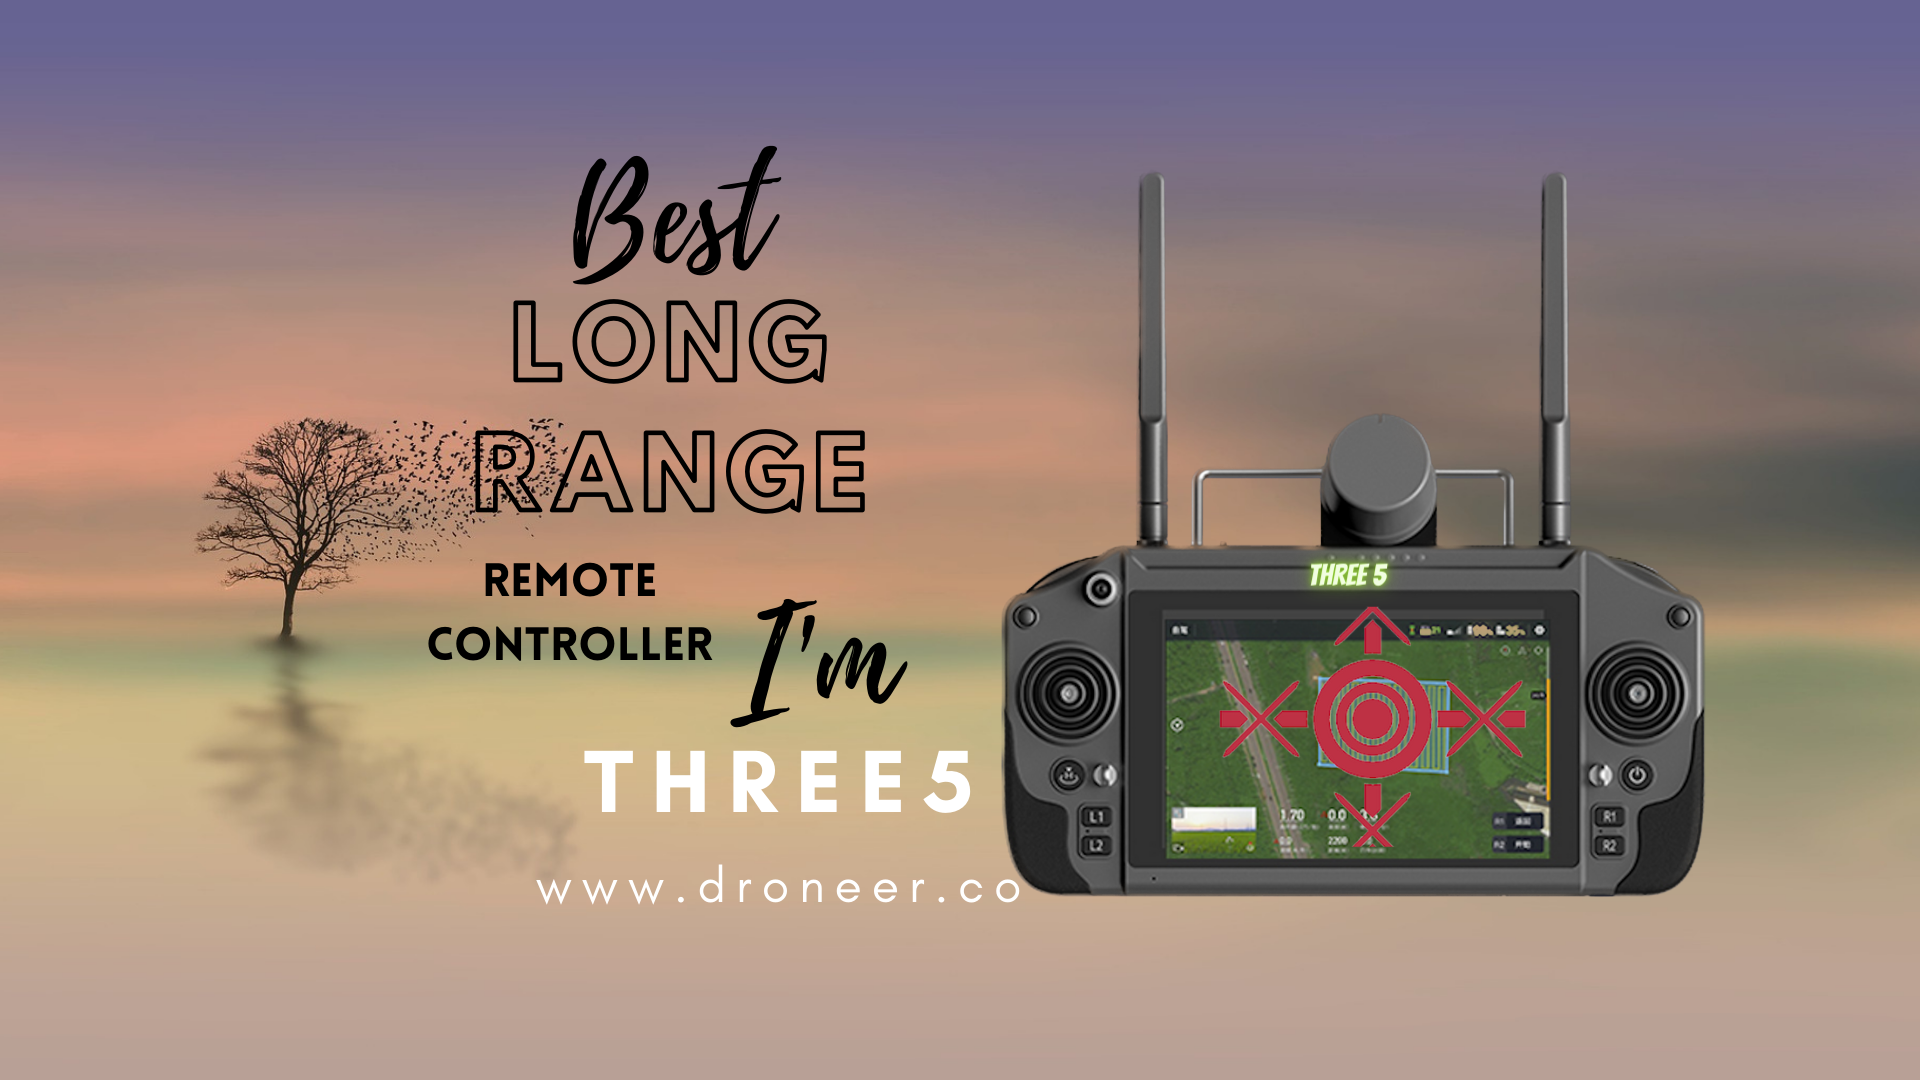 High quality long range remote controller